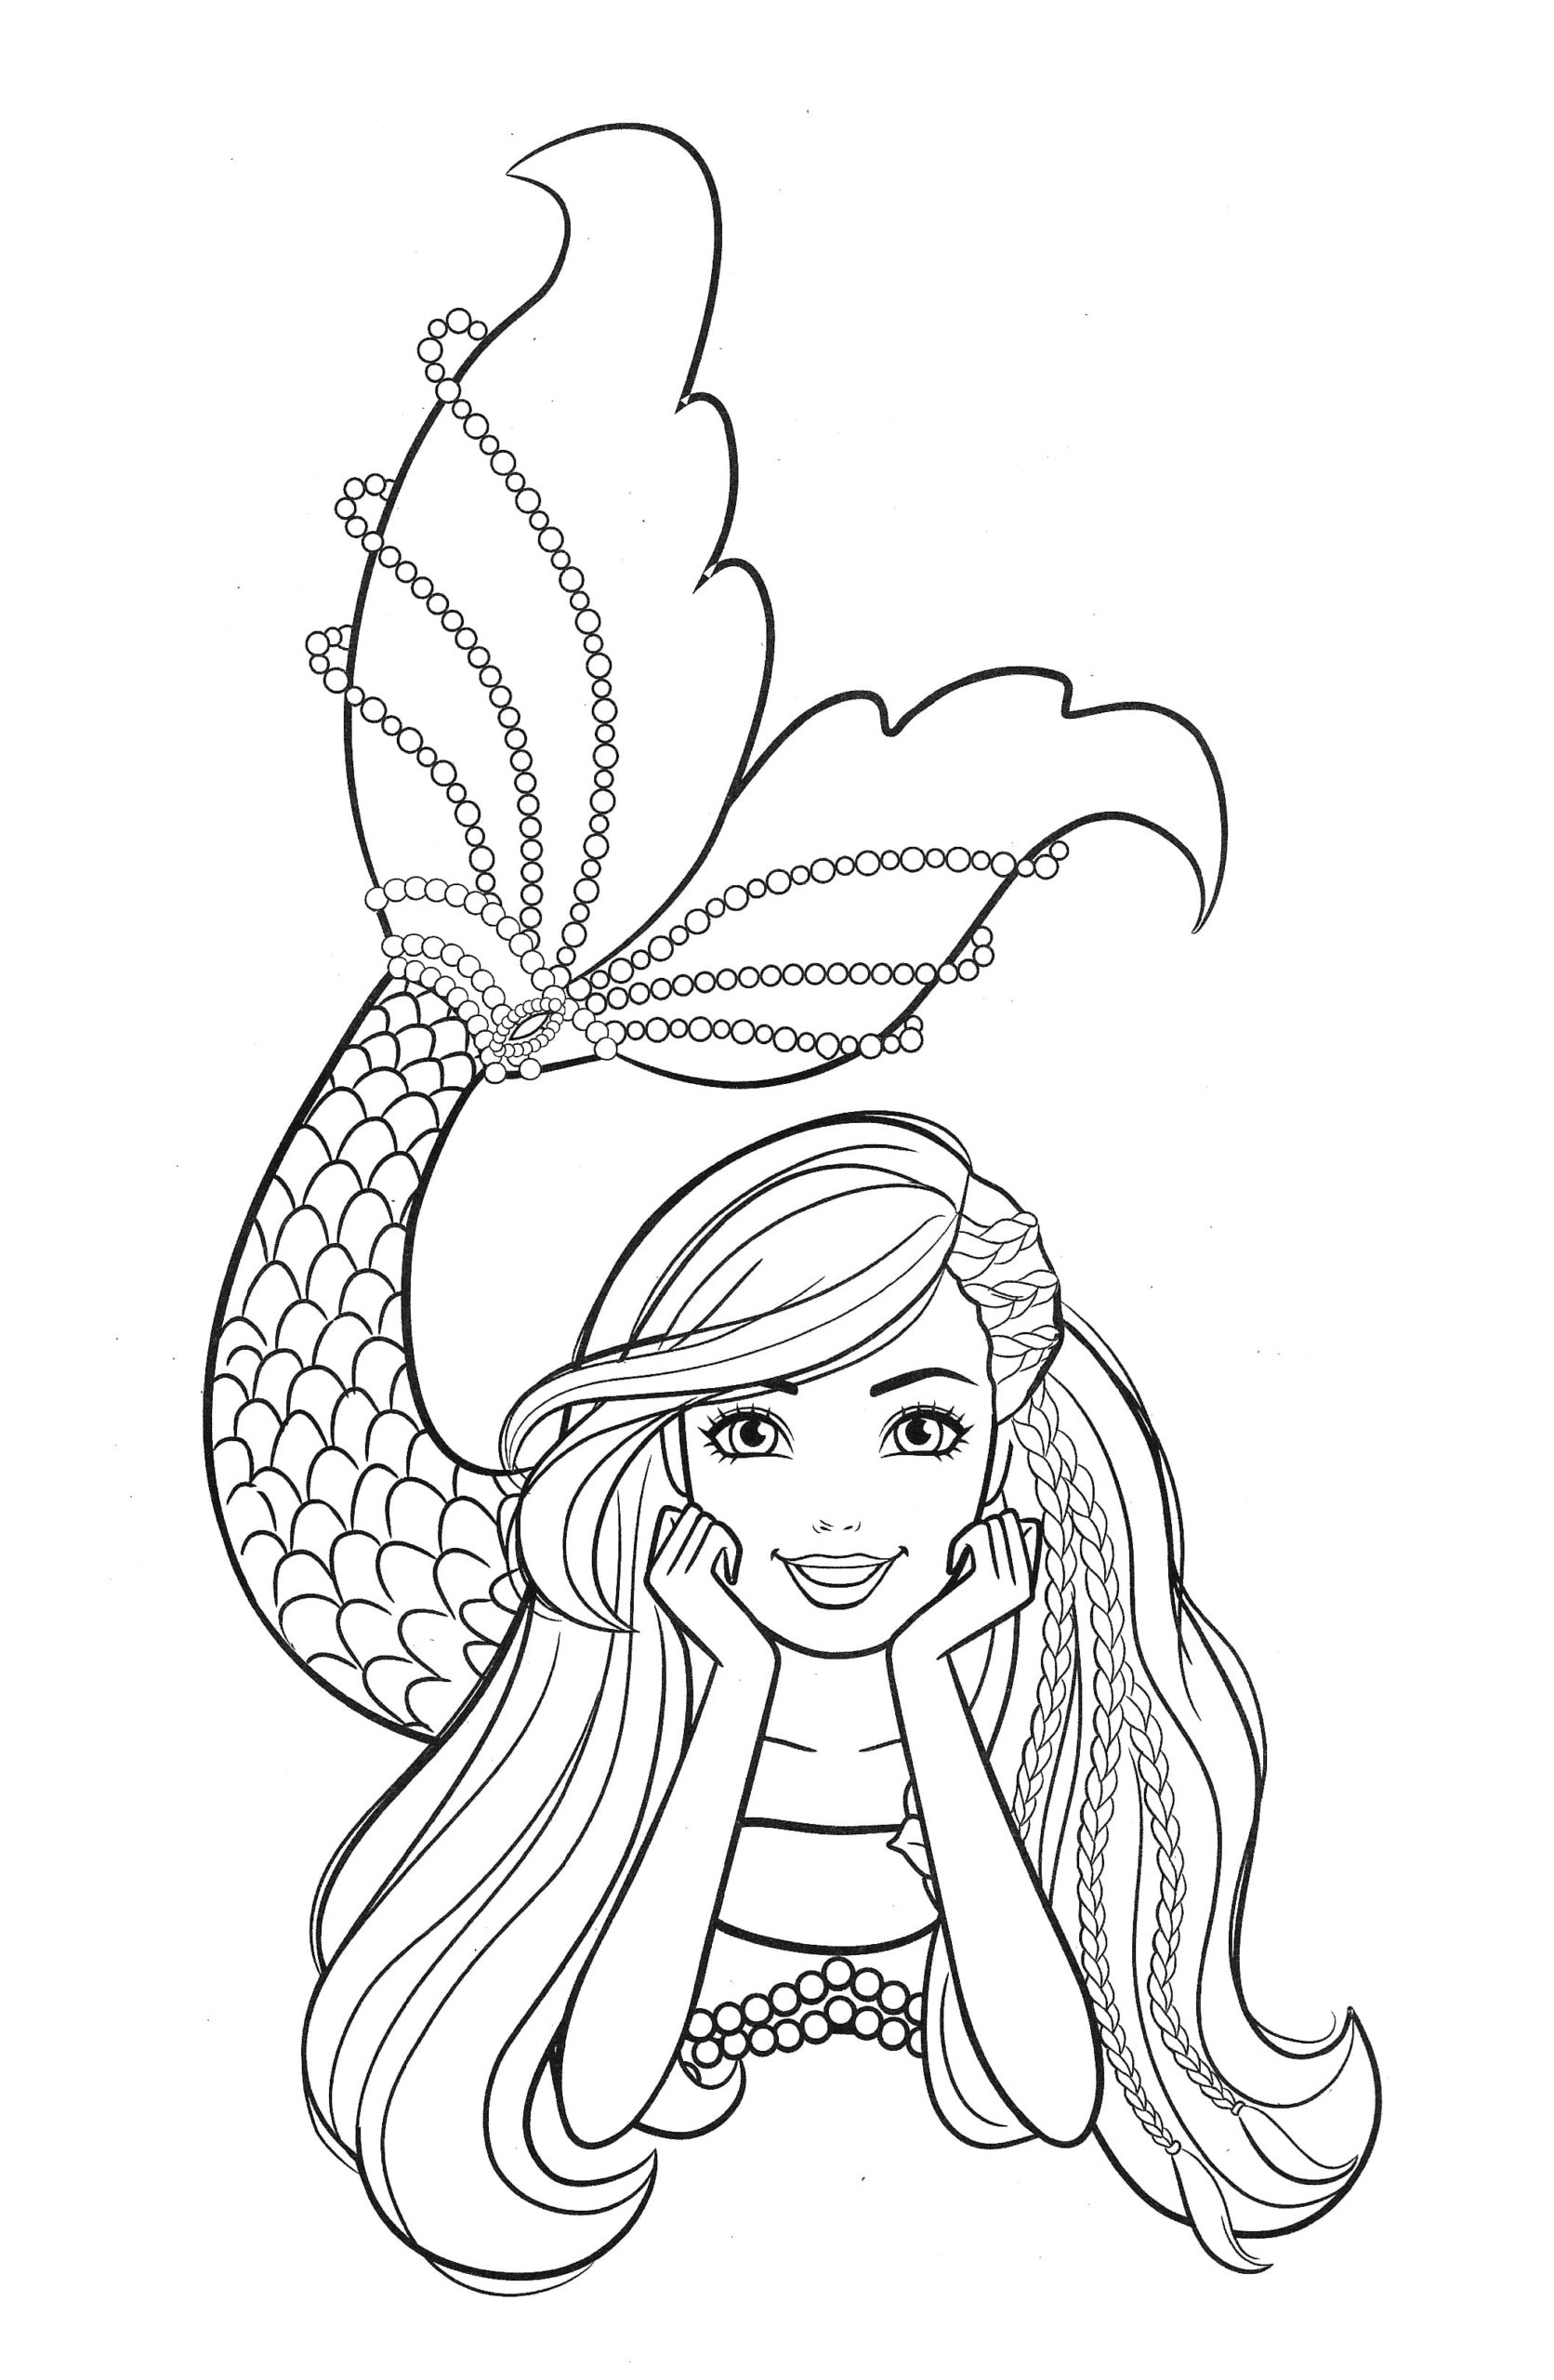 Coloring page Barbie Mermaid The Little Mermaid for girls